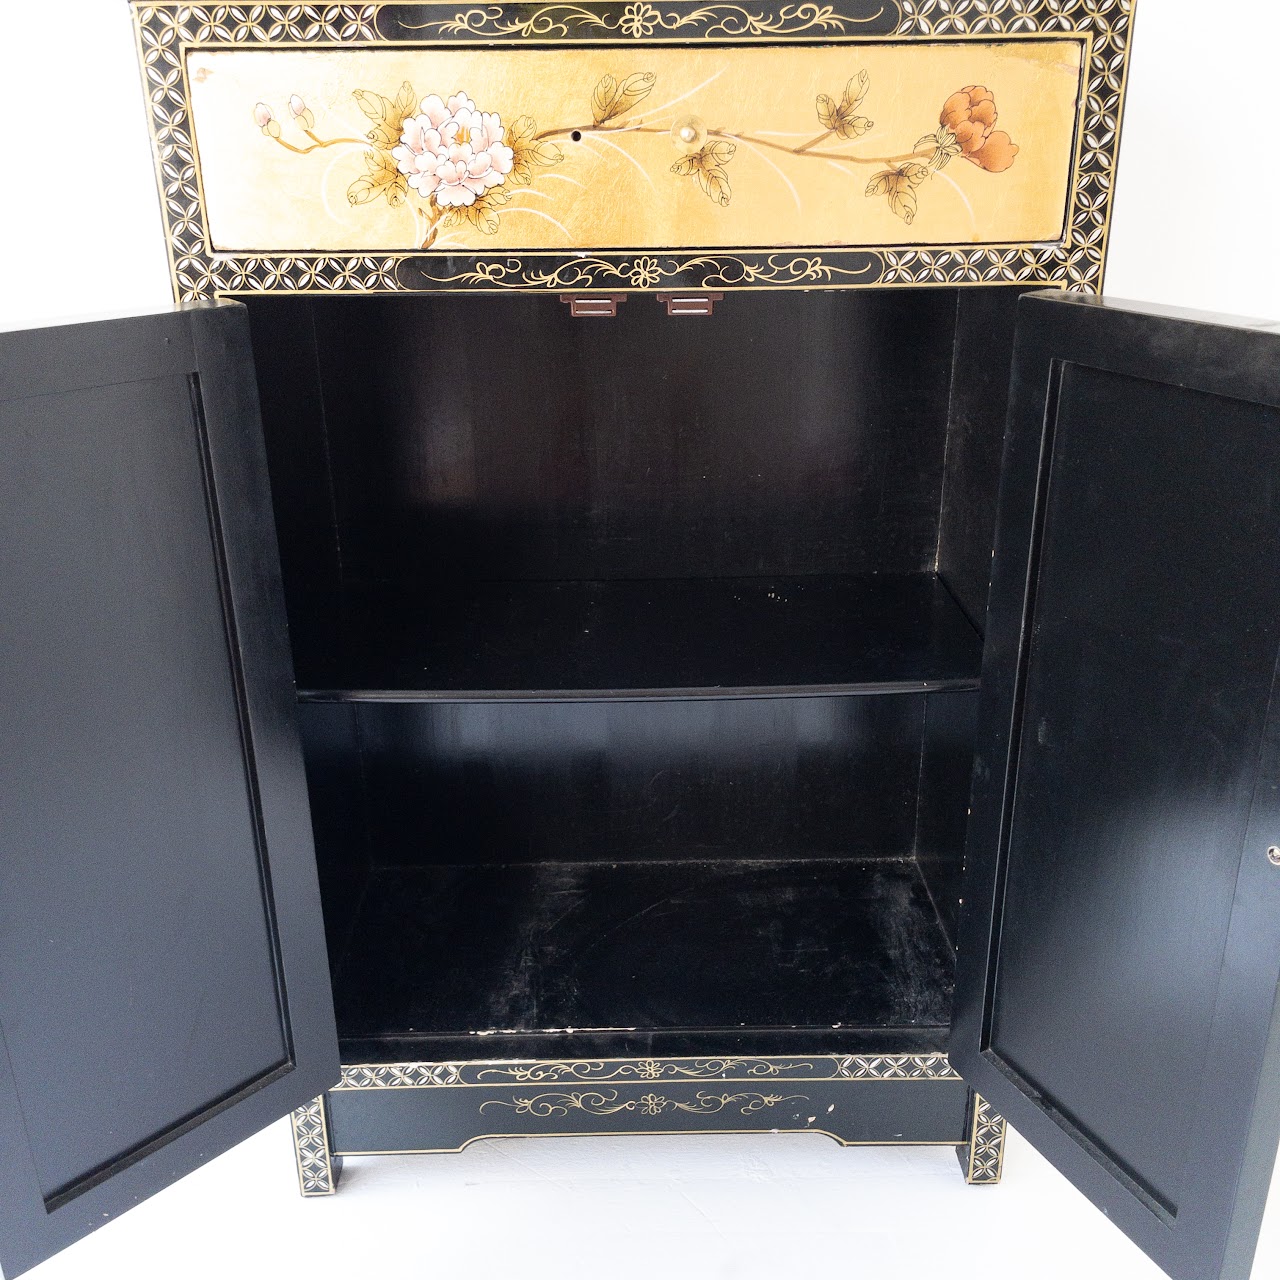 Hand Painted Gilt & Lacquer Asian Cabinet